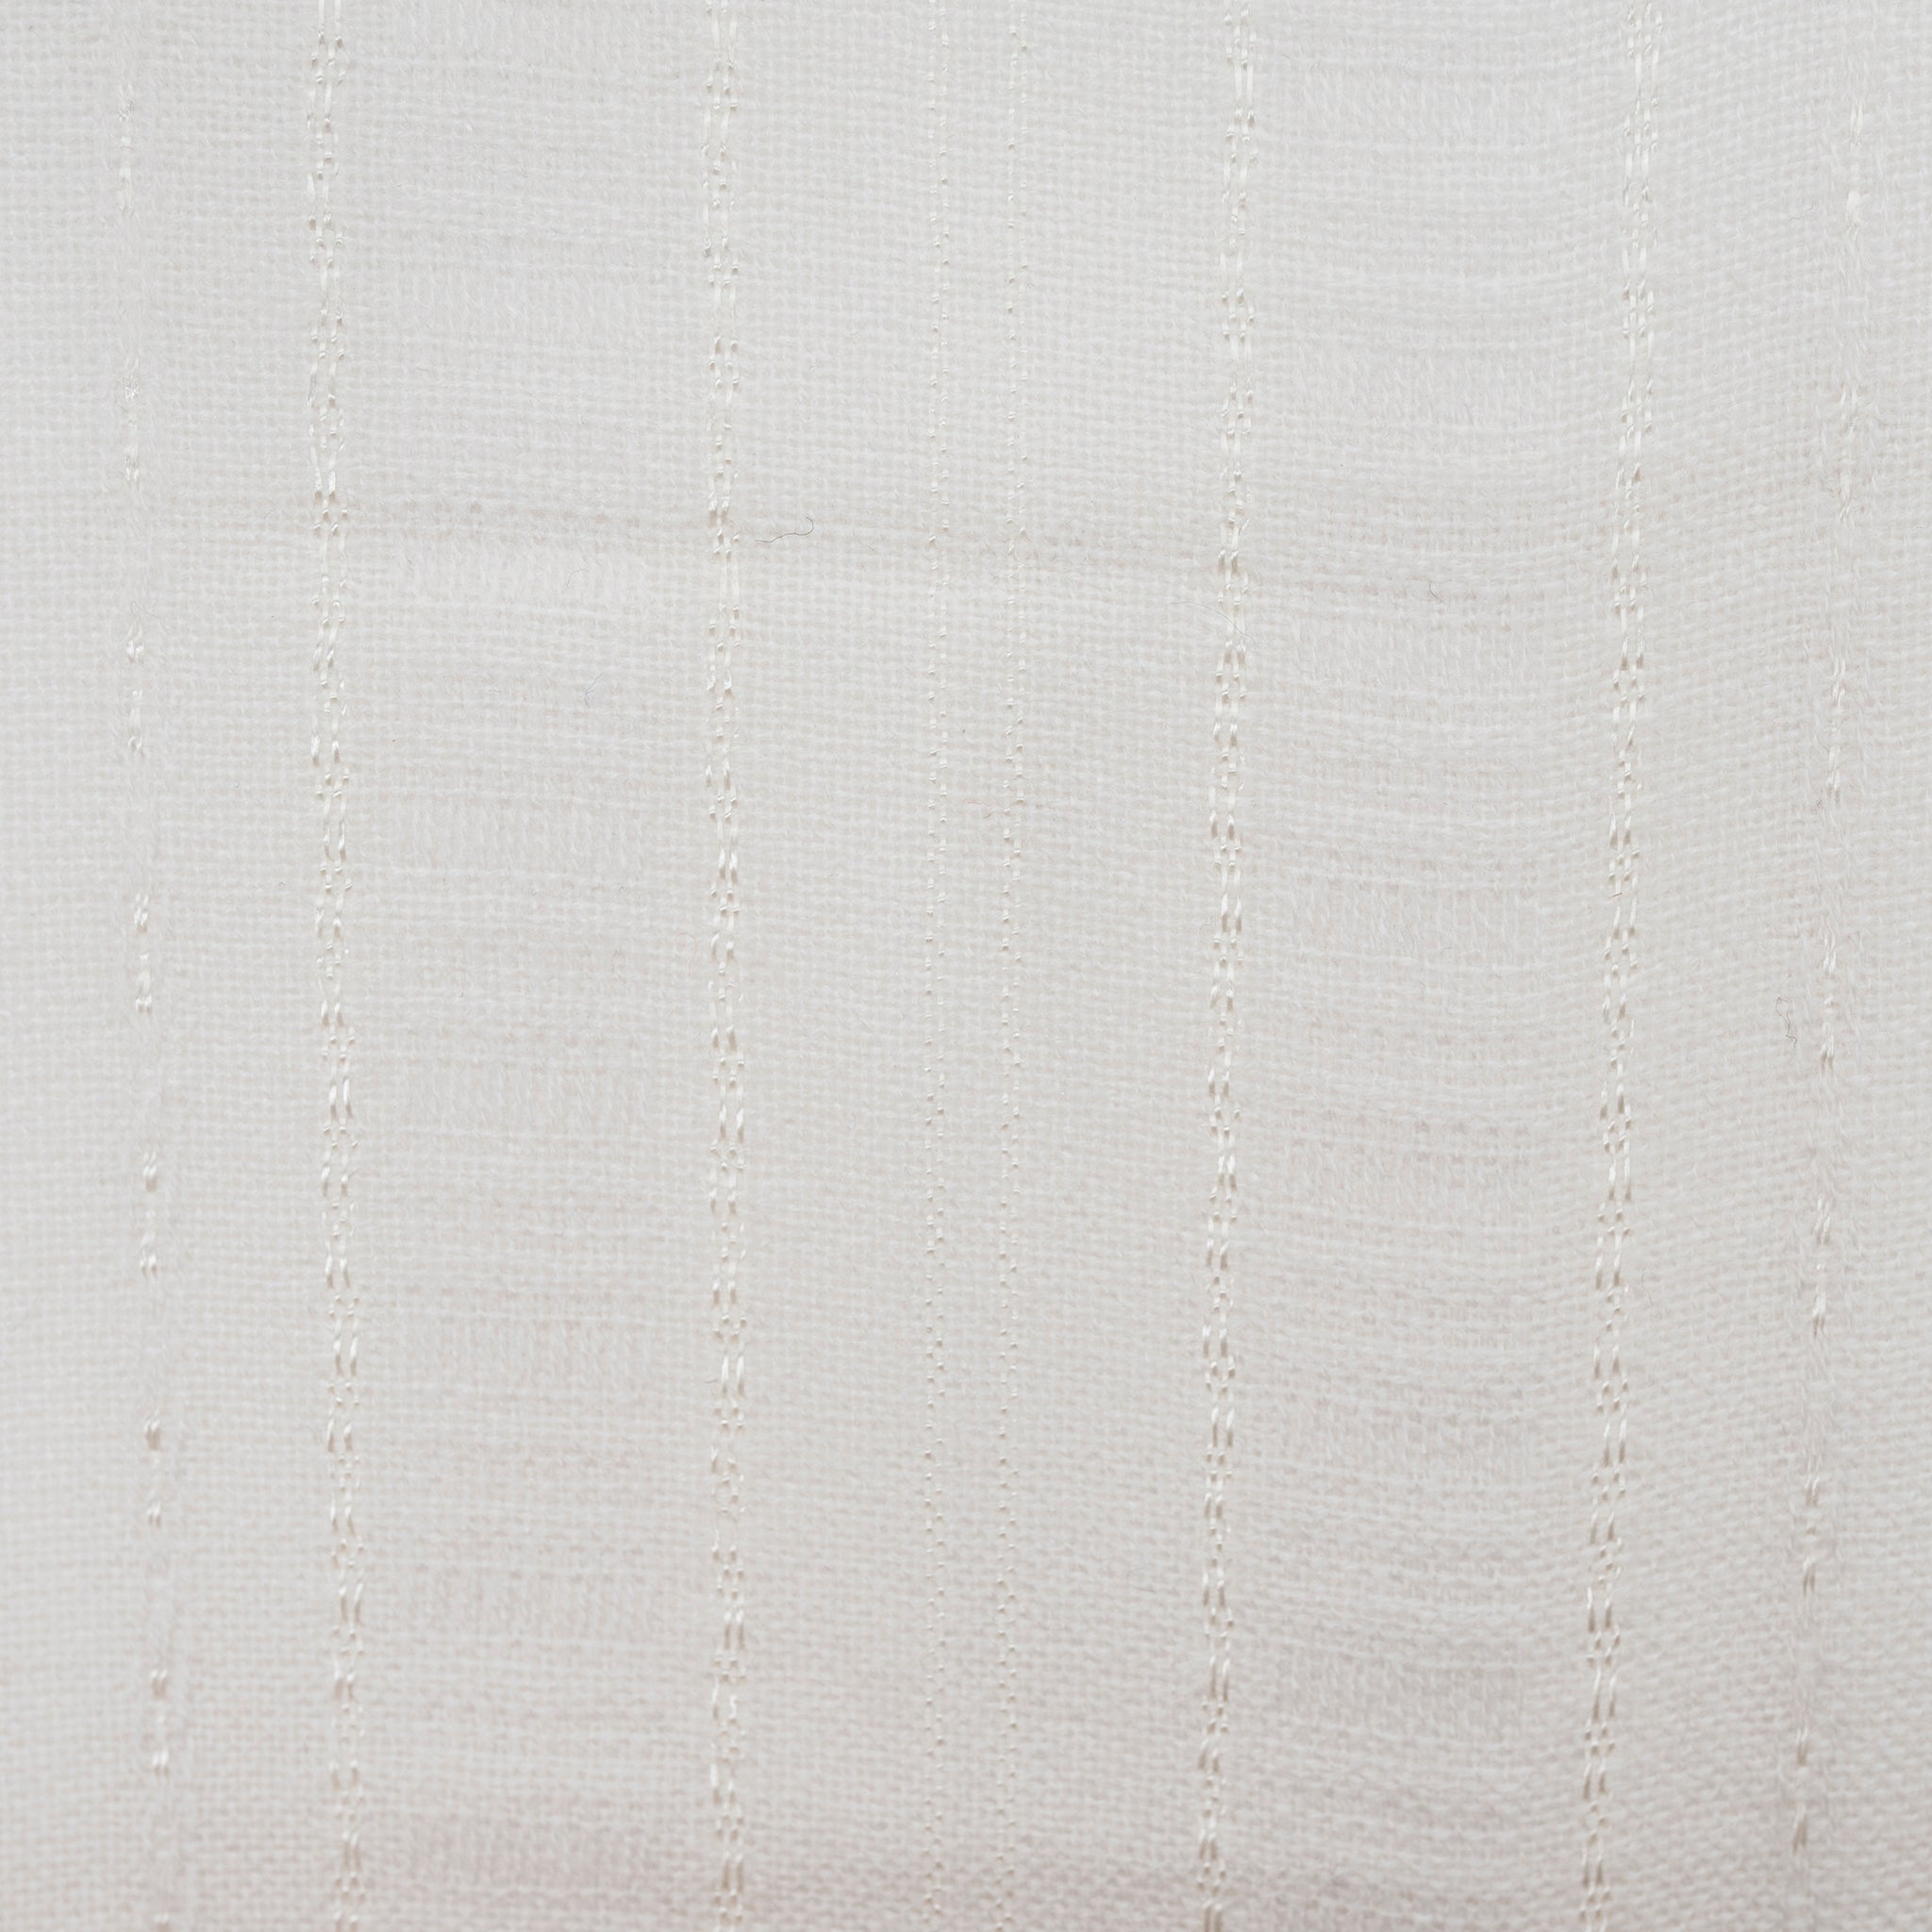 Tablecloths - Classic Design - White on White